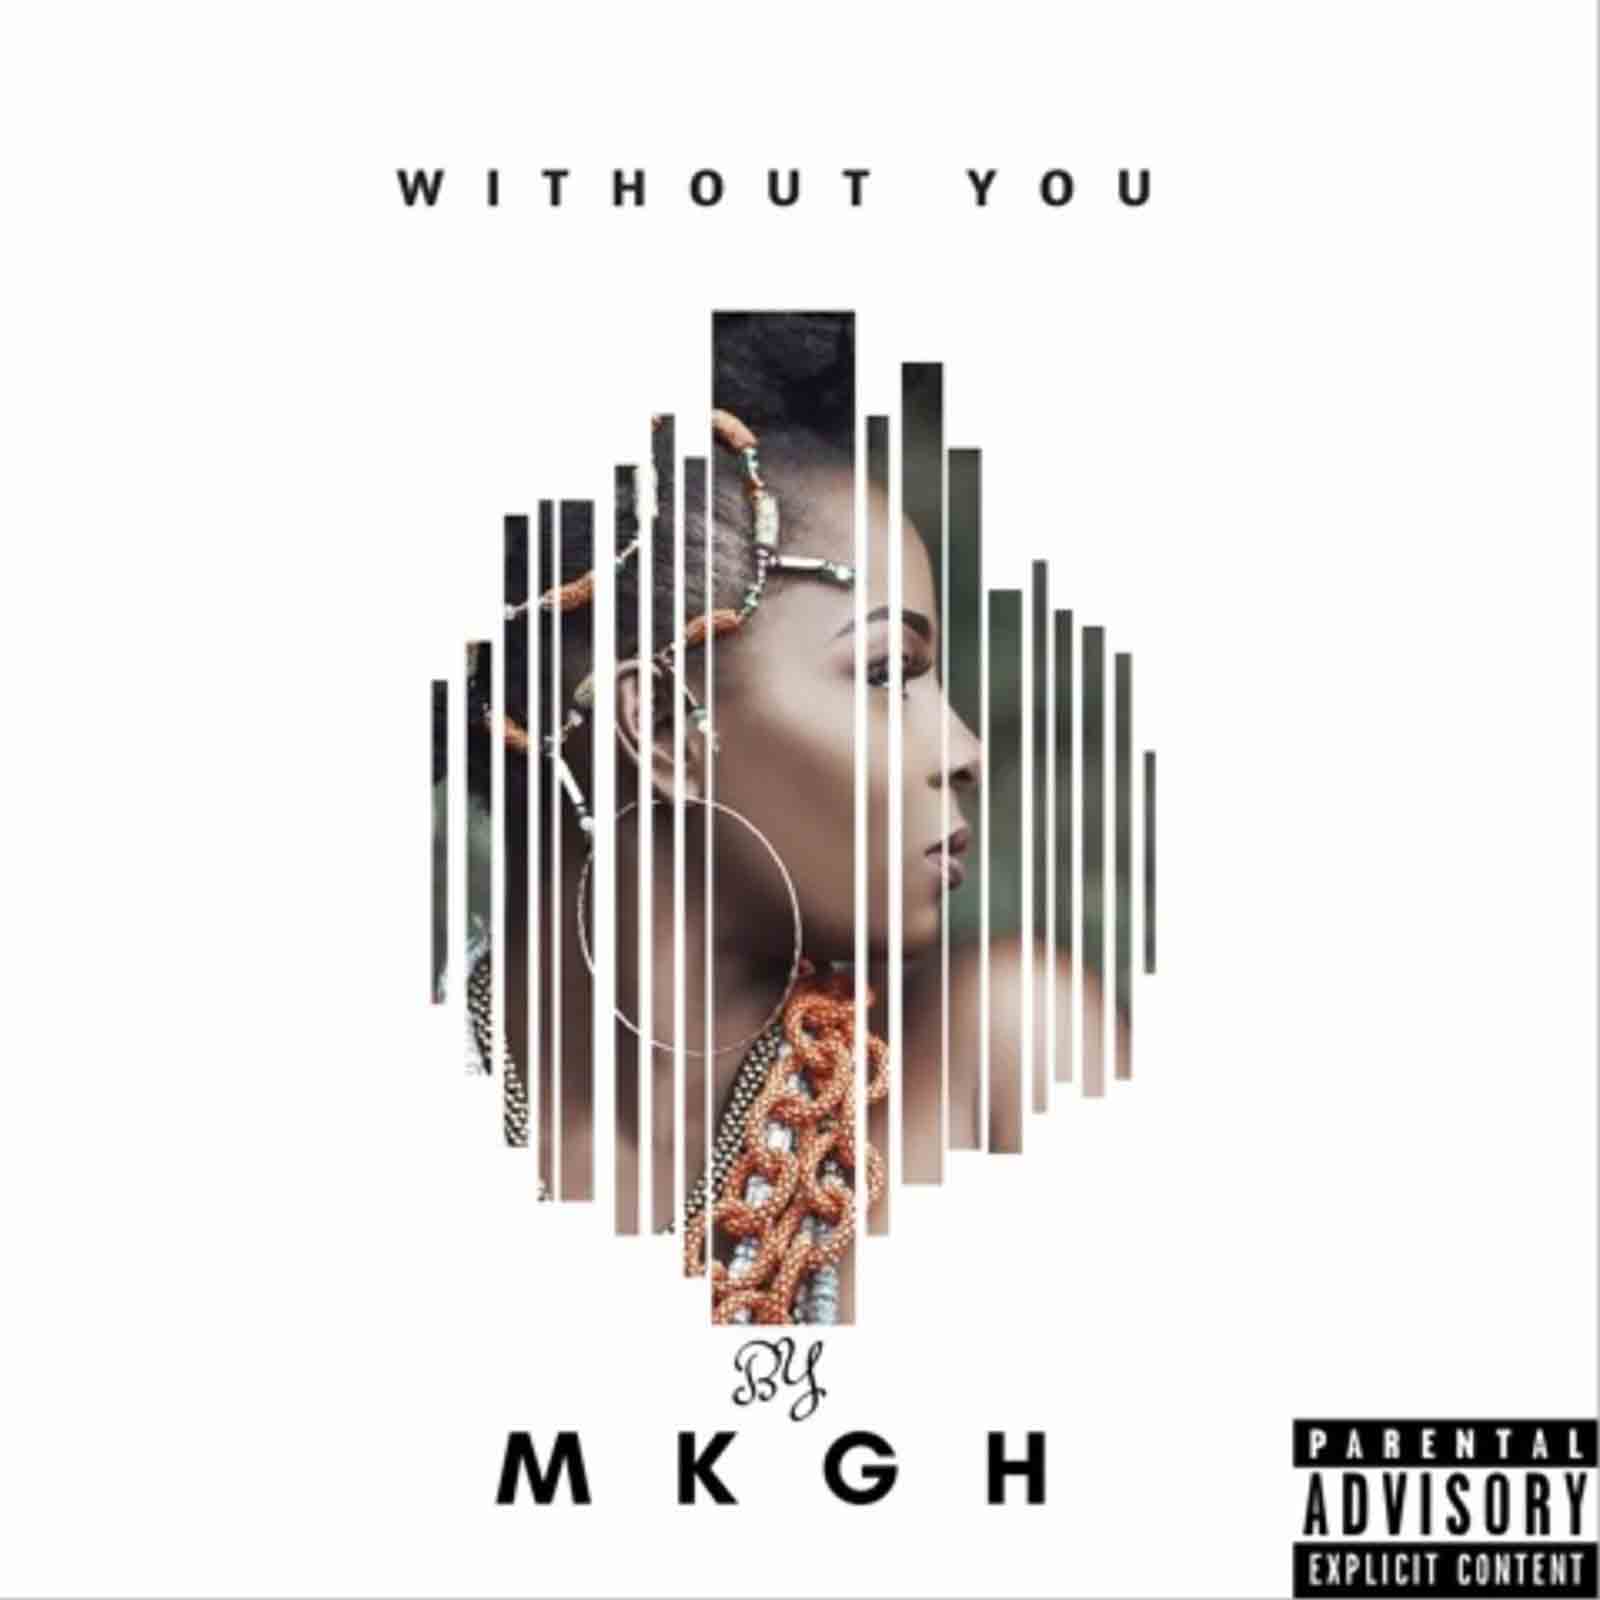 Without You by MKGH